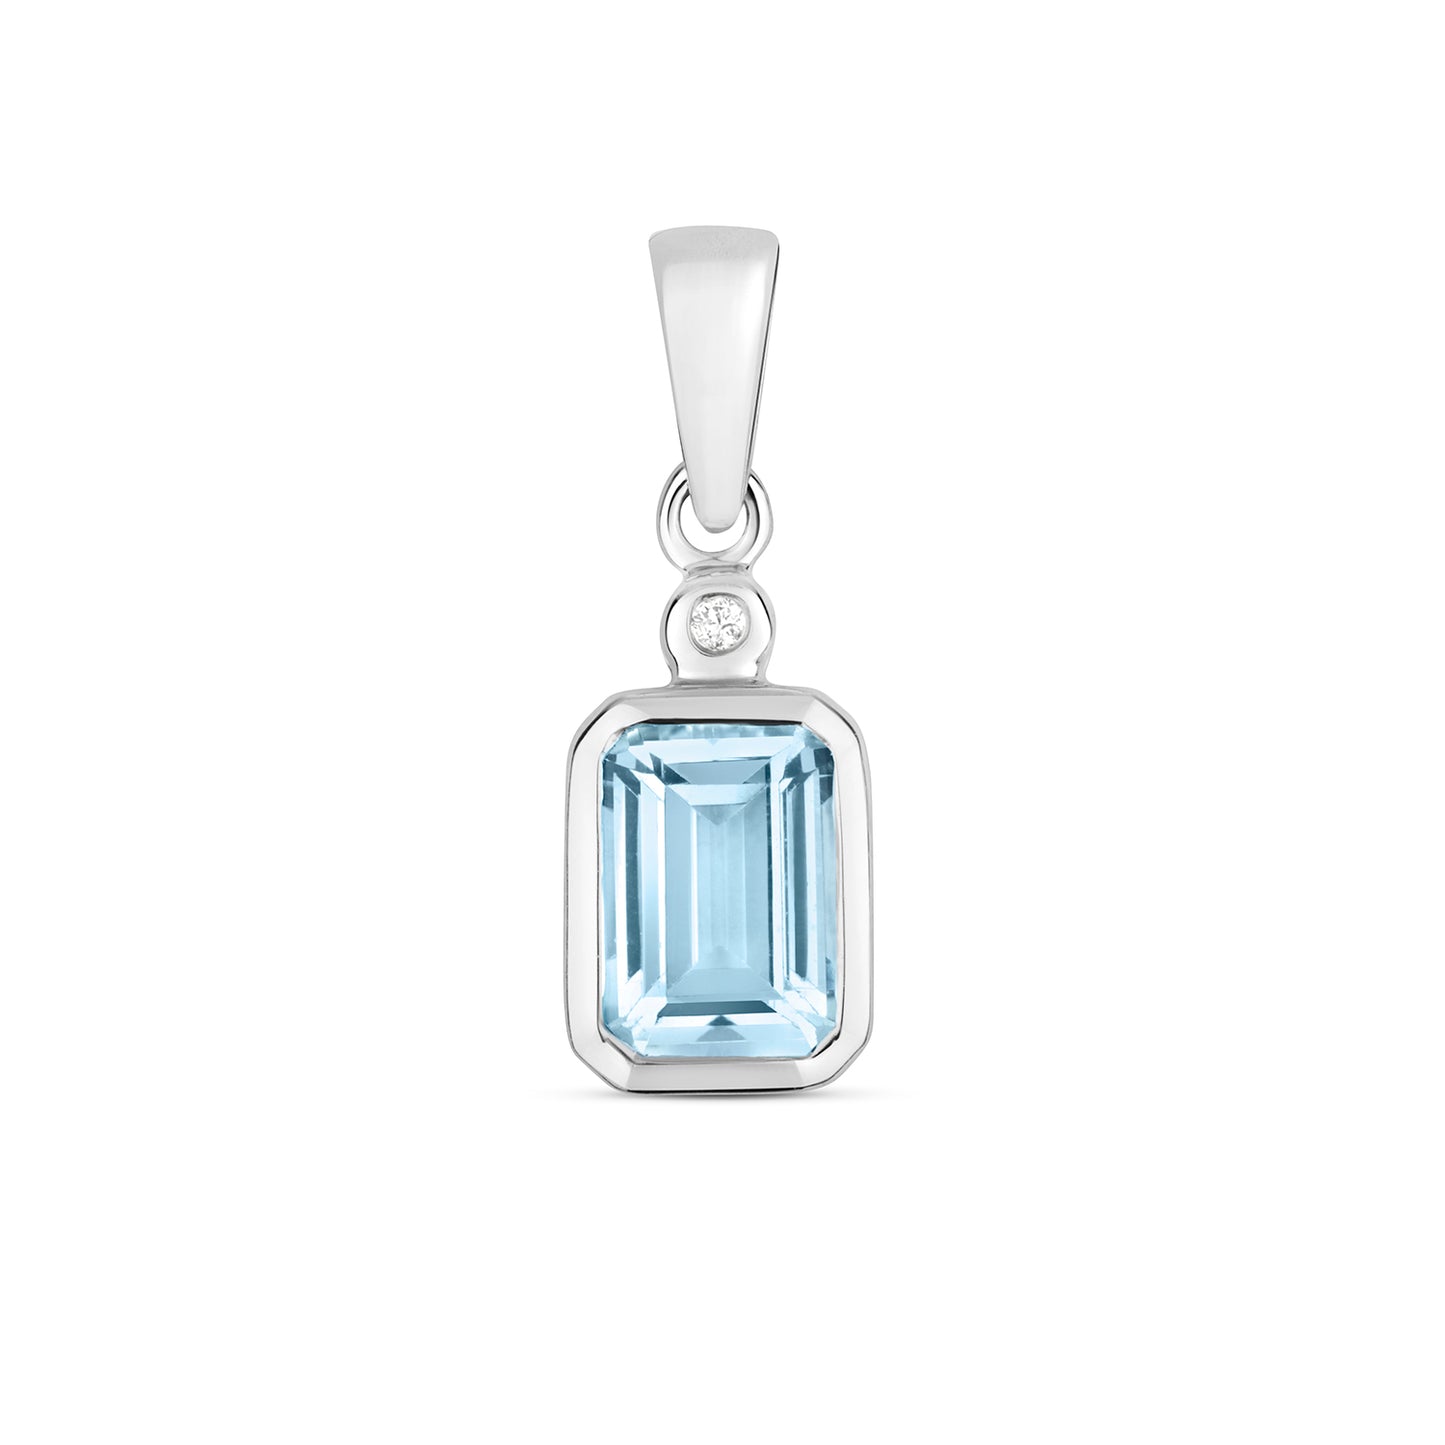 9ct White Gold Aquamarine and Diamond Pendant. We have Chains Available (271)